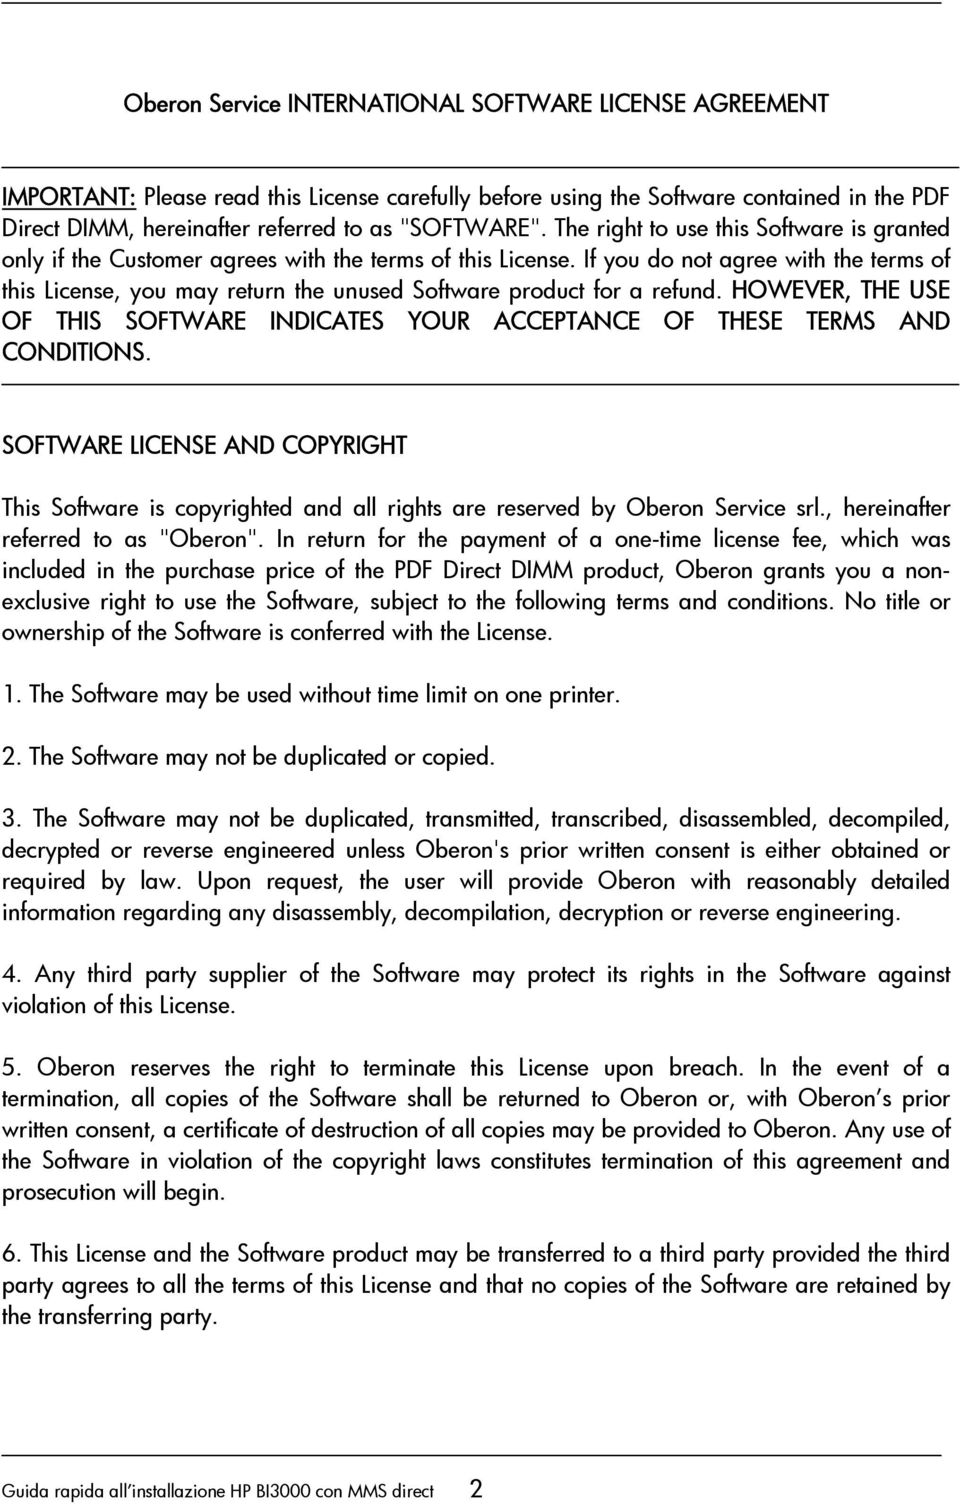 If you do not agree with the terms of this License, you may return the unused Software product for a refund. HOWEVER, THE USE OF THIS SOFTWARE INDICATES YOUR ACCEPTANCE OF THESE TERMS AND CONDITIONS.